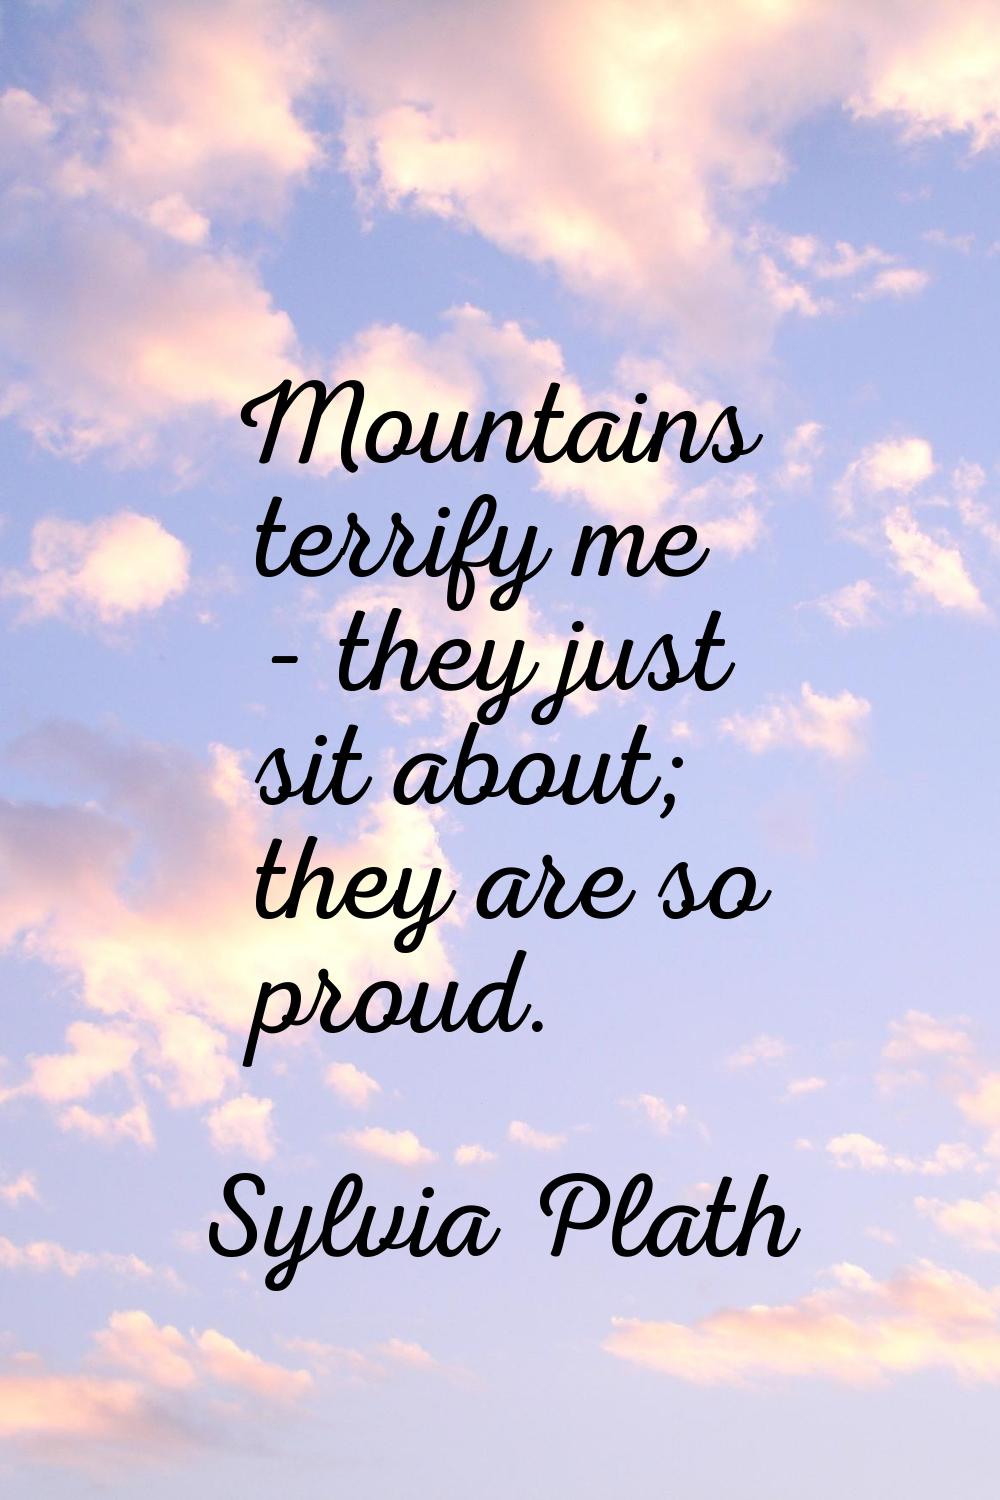 Mountains terrify me - they just sit about; they are so proud.